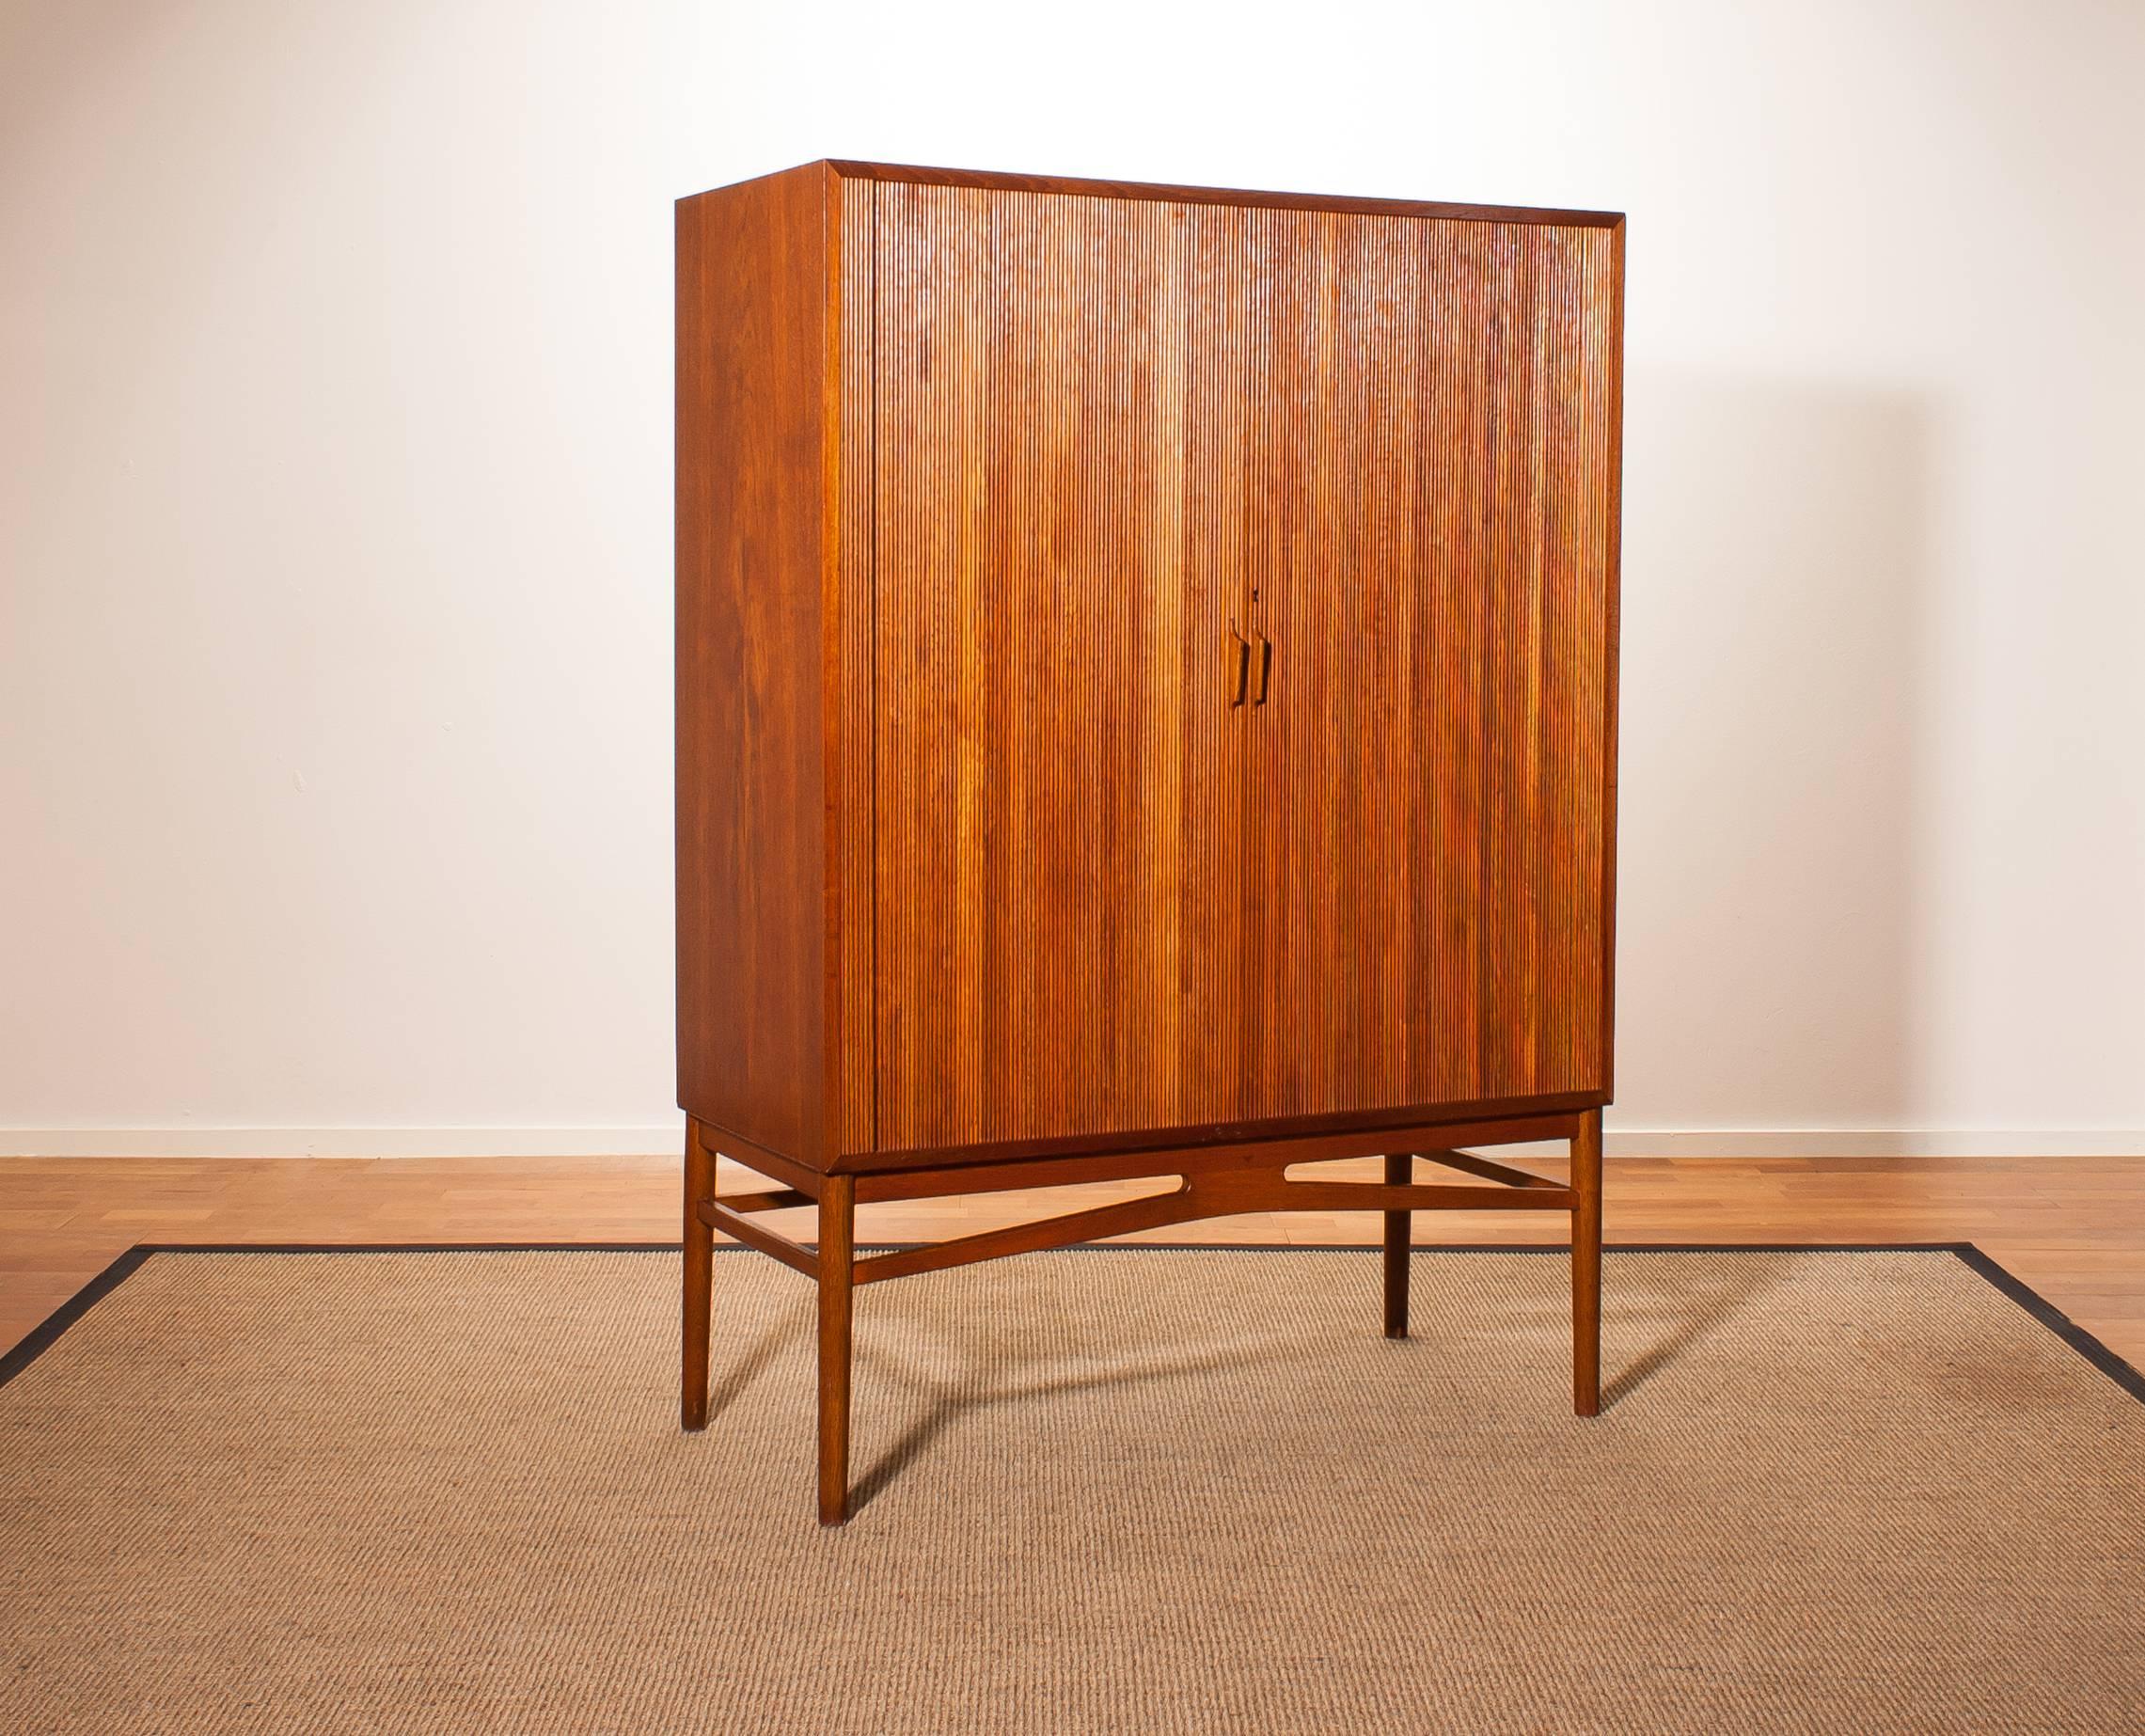 Beautiful teak archive cabinet designed by Carl-Axel Acking.
This cabinet has two wonderful tambour sliding doors and inside there are twelve large archive drawers made of beech.
It is in a very nice condition.
Period 1950s
Dimensions: H 146 cm,